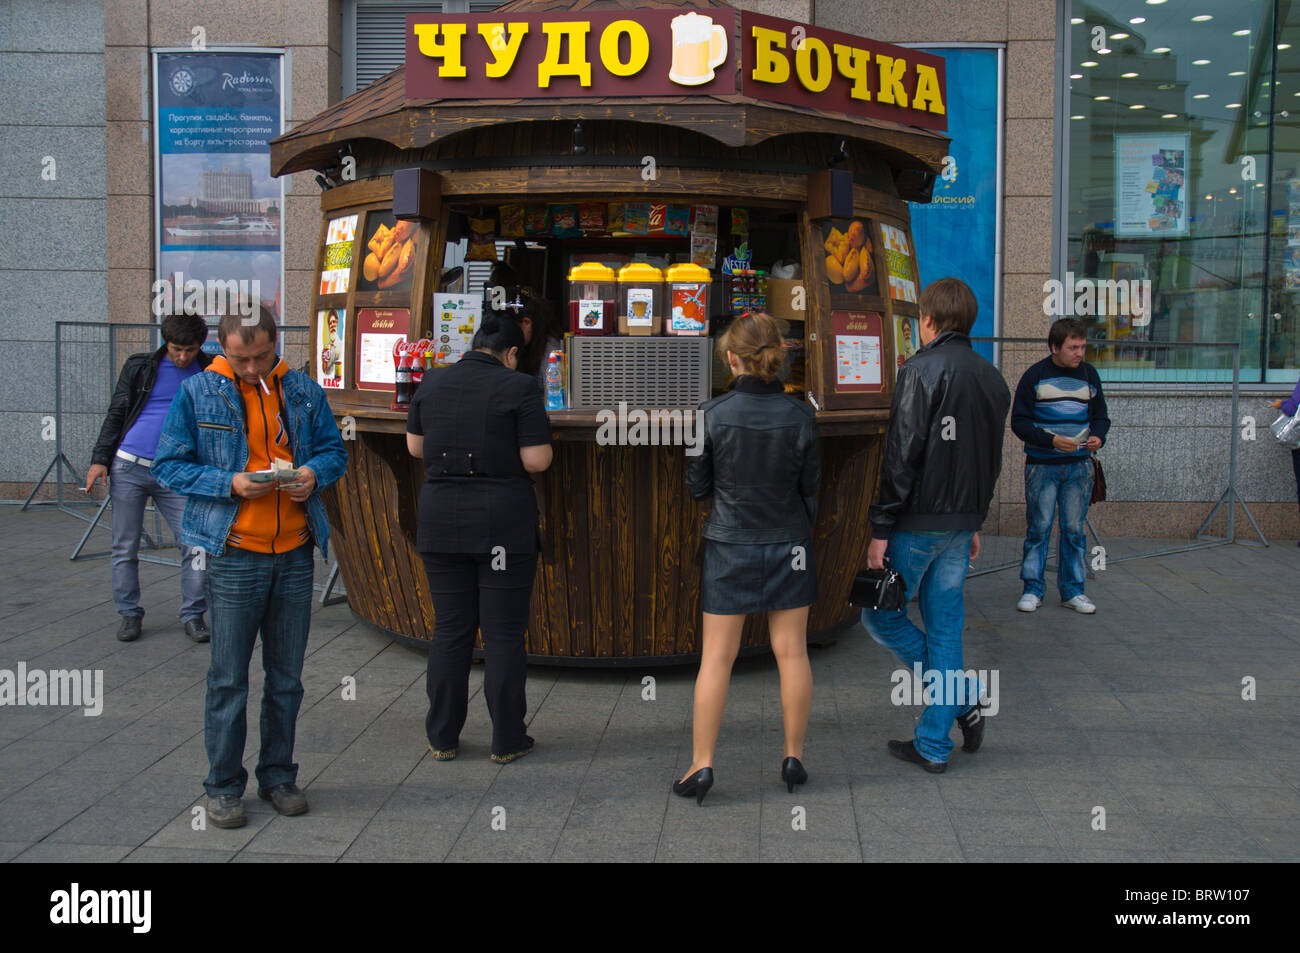 Drinks stall at pl Evropy square in front of Kievsky vokzal train station Moscow Russia Europe Stock Photo